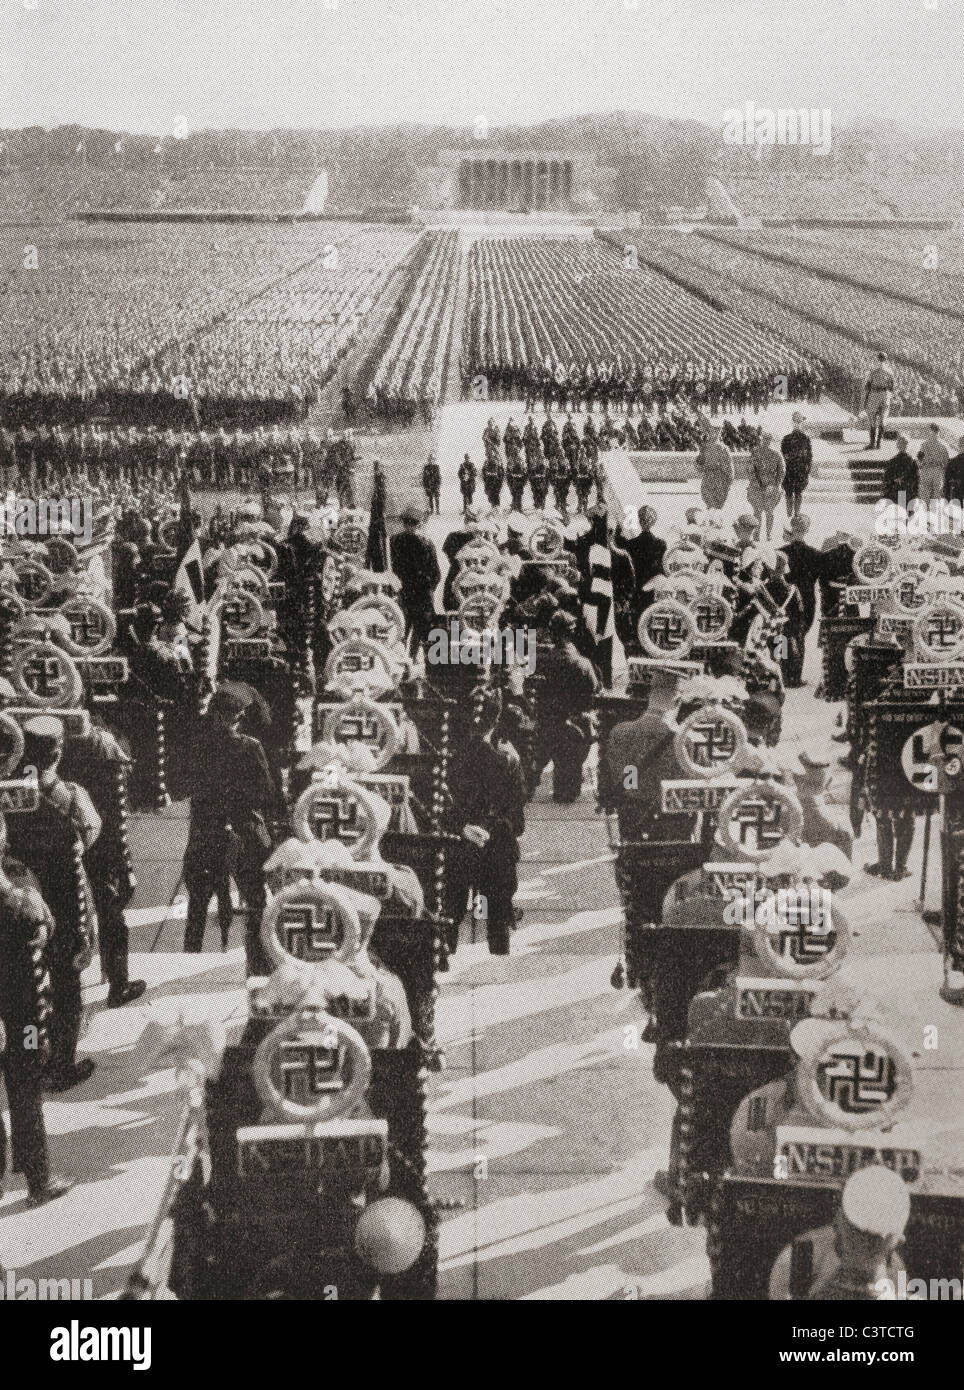 Overview of the mass roll call of SA, SS, and NSKK troops at the 1935 Nazi Party Day, Luitpold Arena, Nuremberg, Germany. Stock Photo